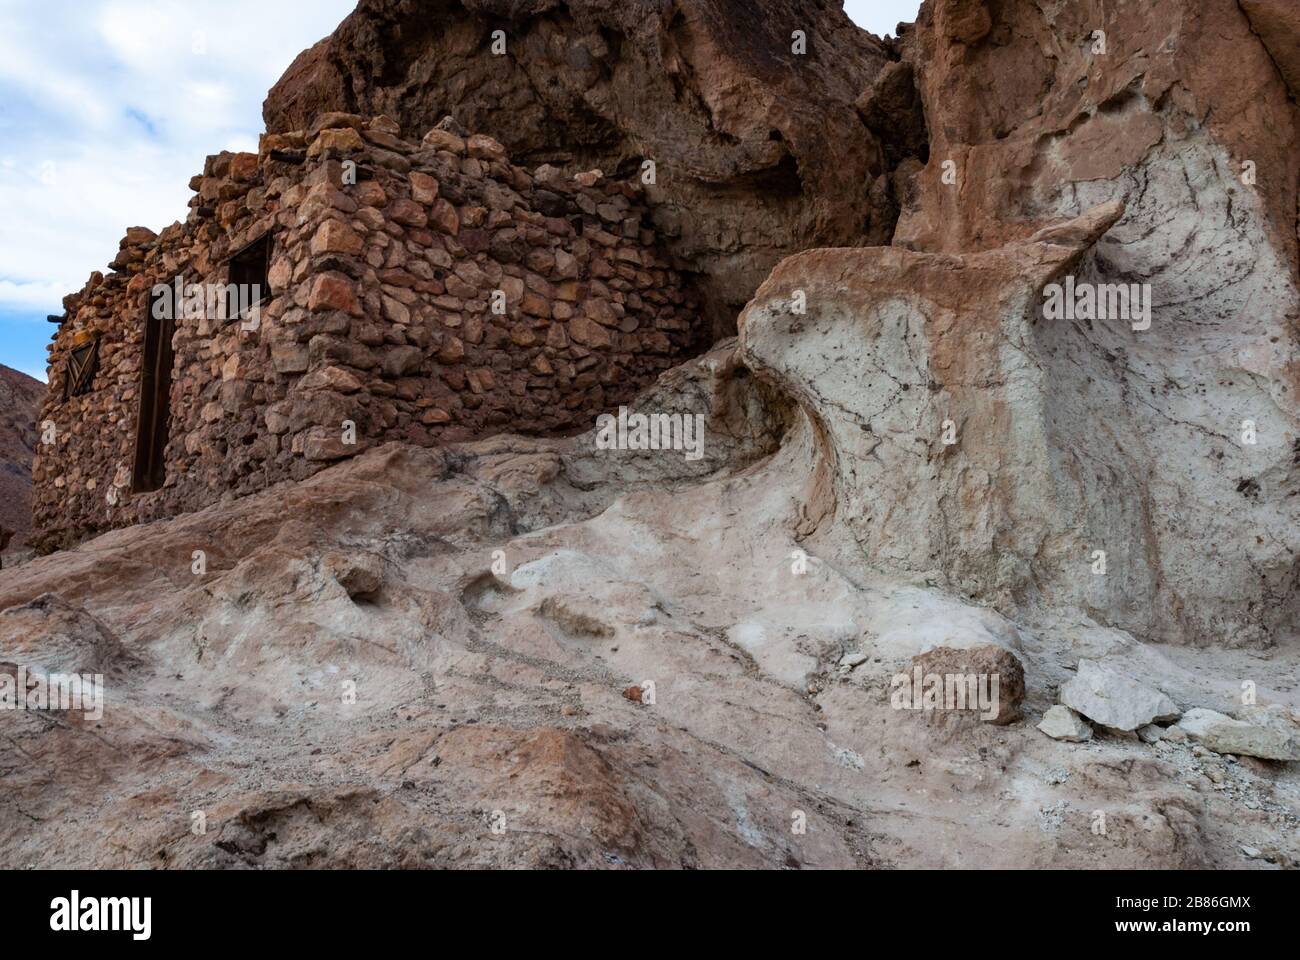 Abandoned houses built in the rock on the Calico Ghost town Stock Photo